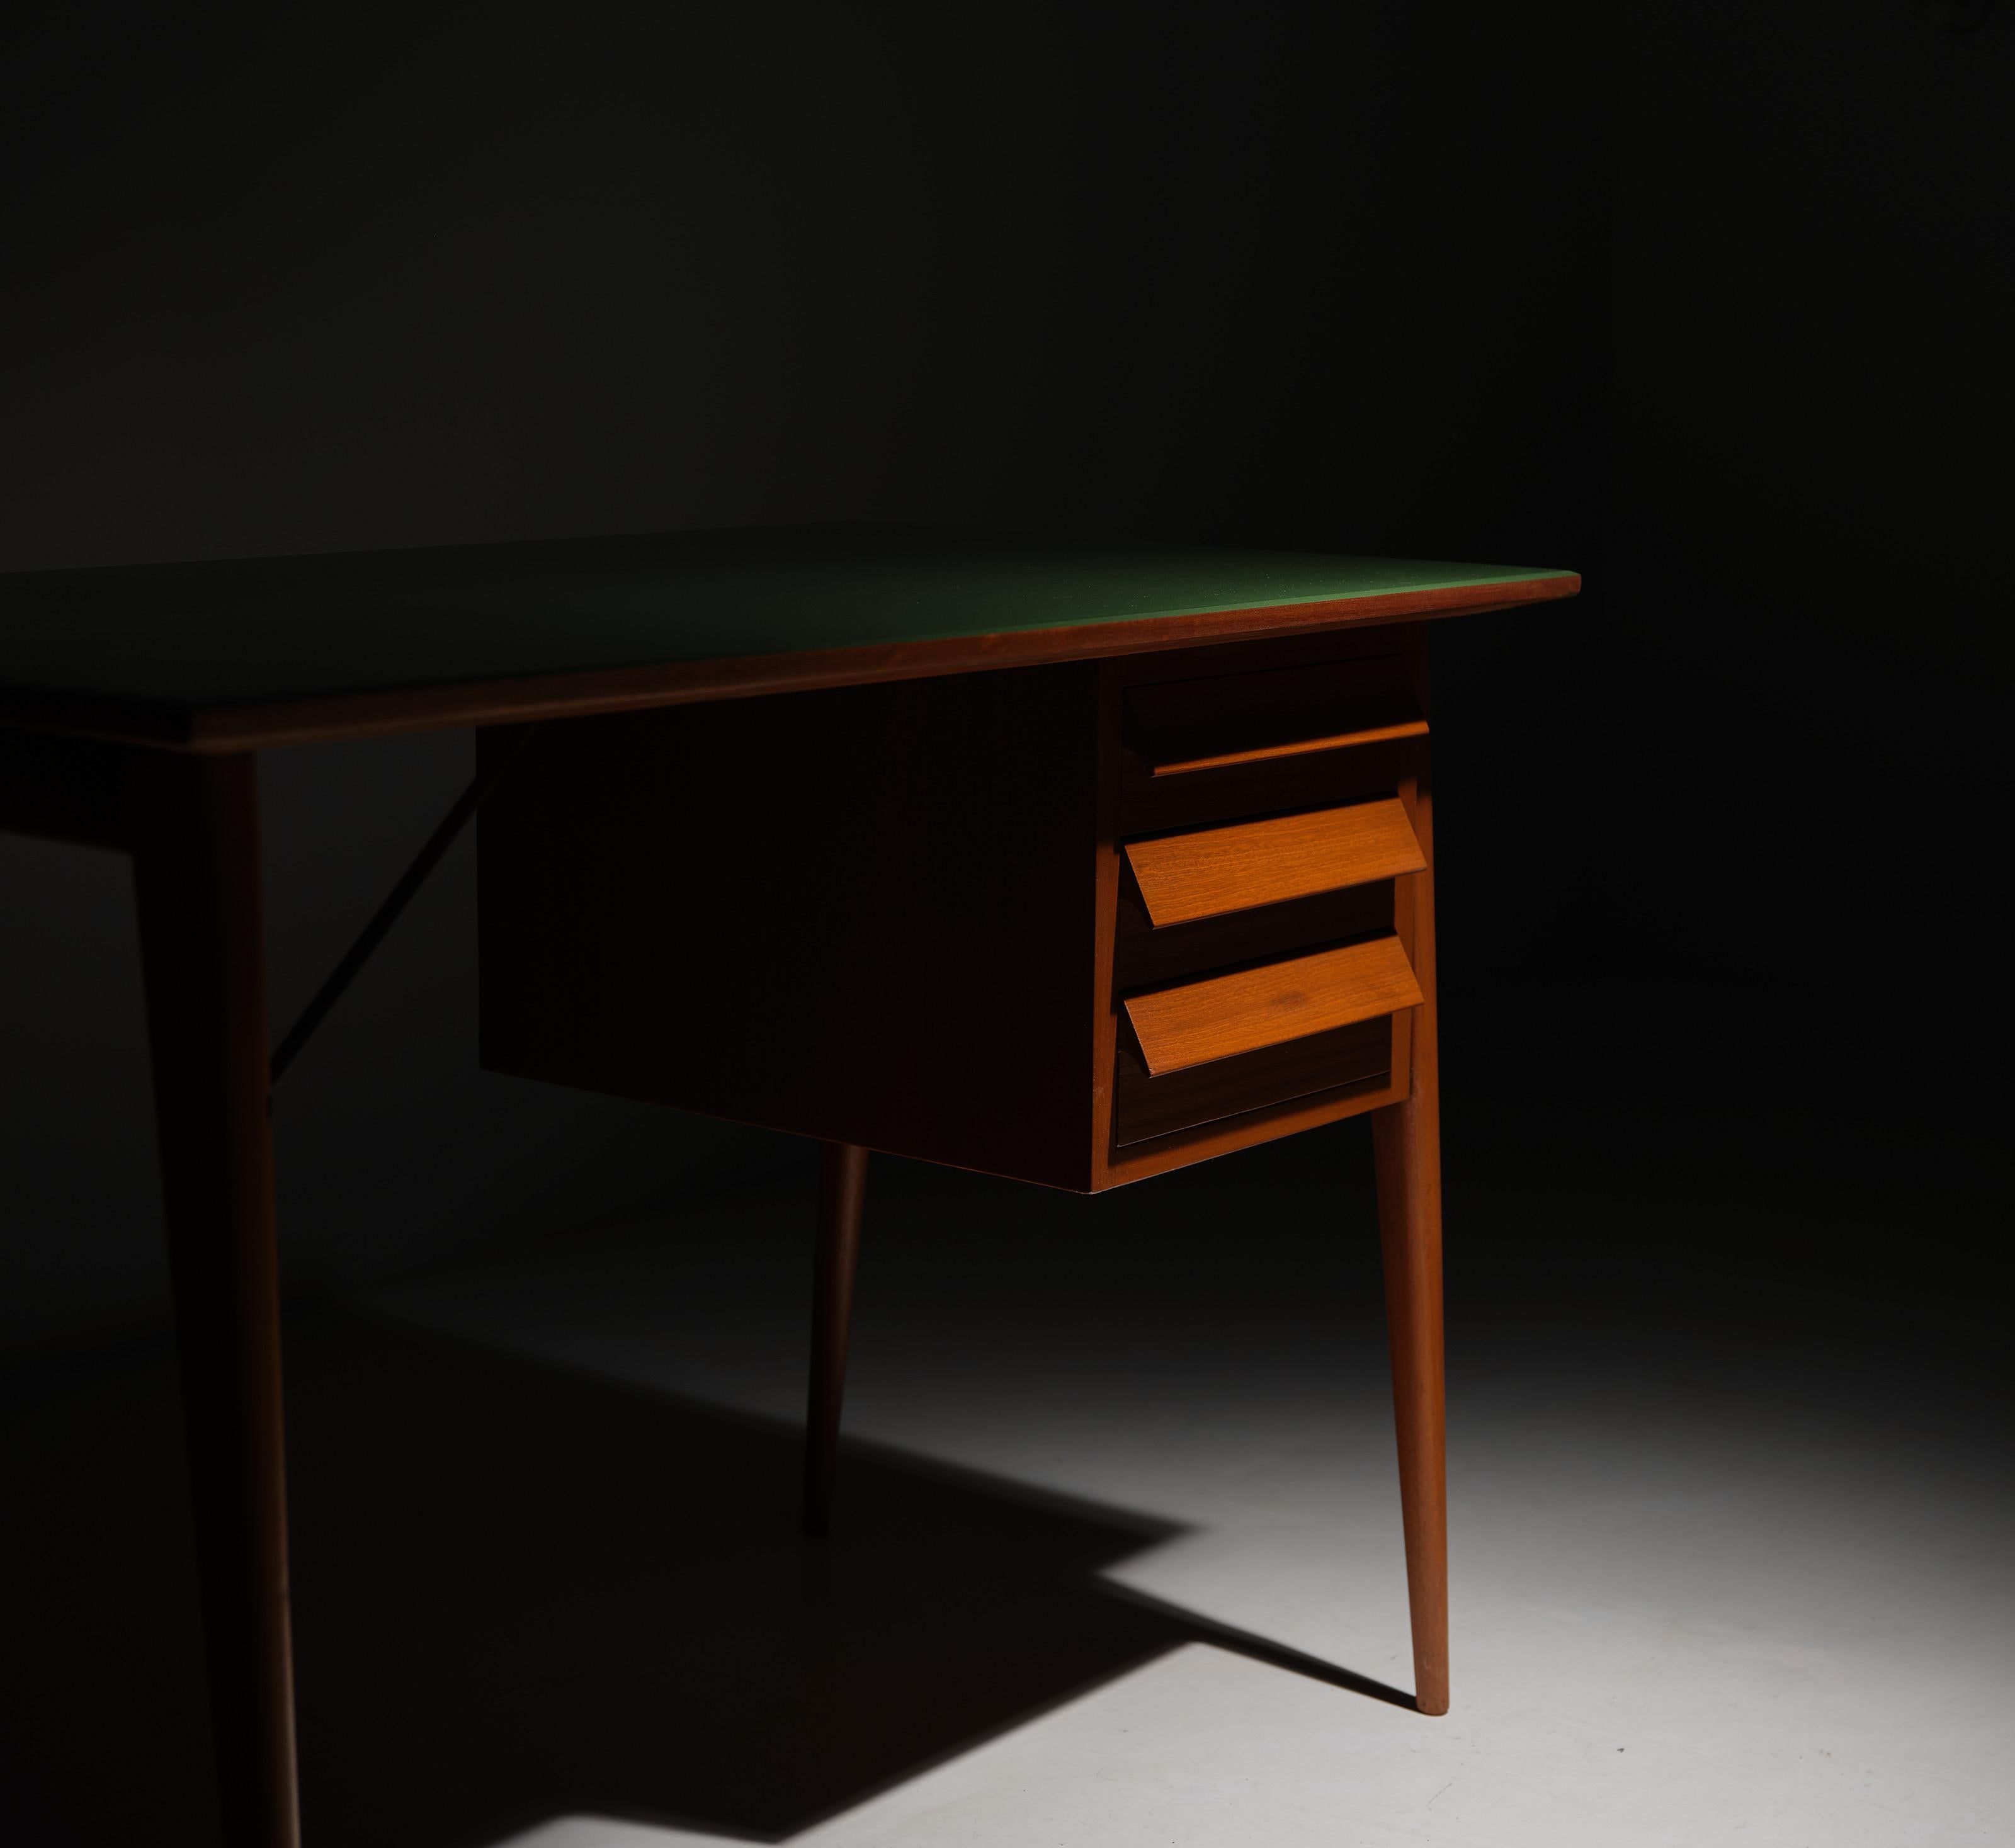 Enhance your workspace with this exquisite Midcentury Modern desk. Crafted entirely from premium teak wood, this desk features three spacious drawers for convenient storage. The standout feature of this piece lies in its expertly applied green